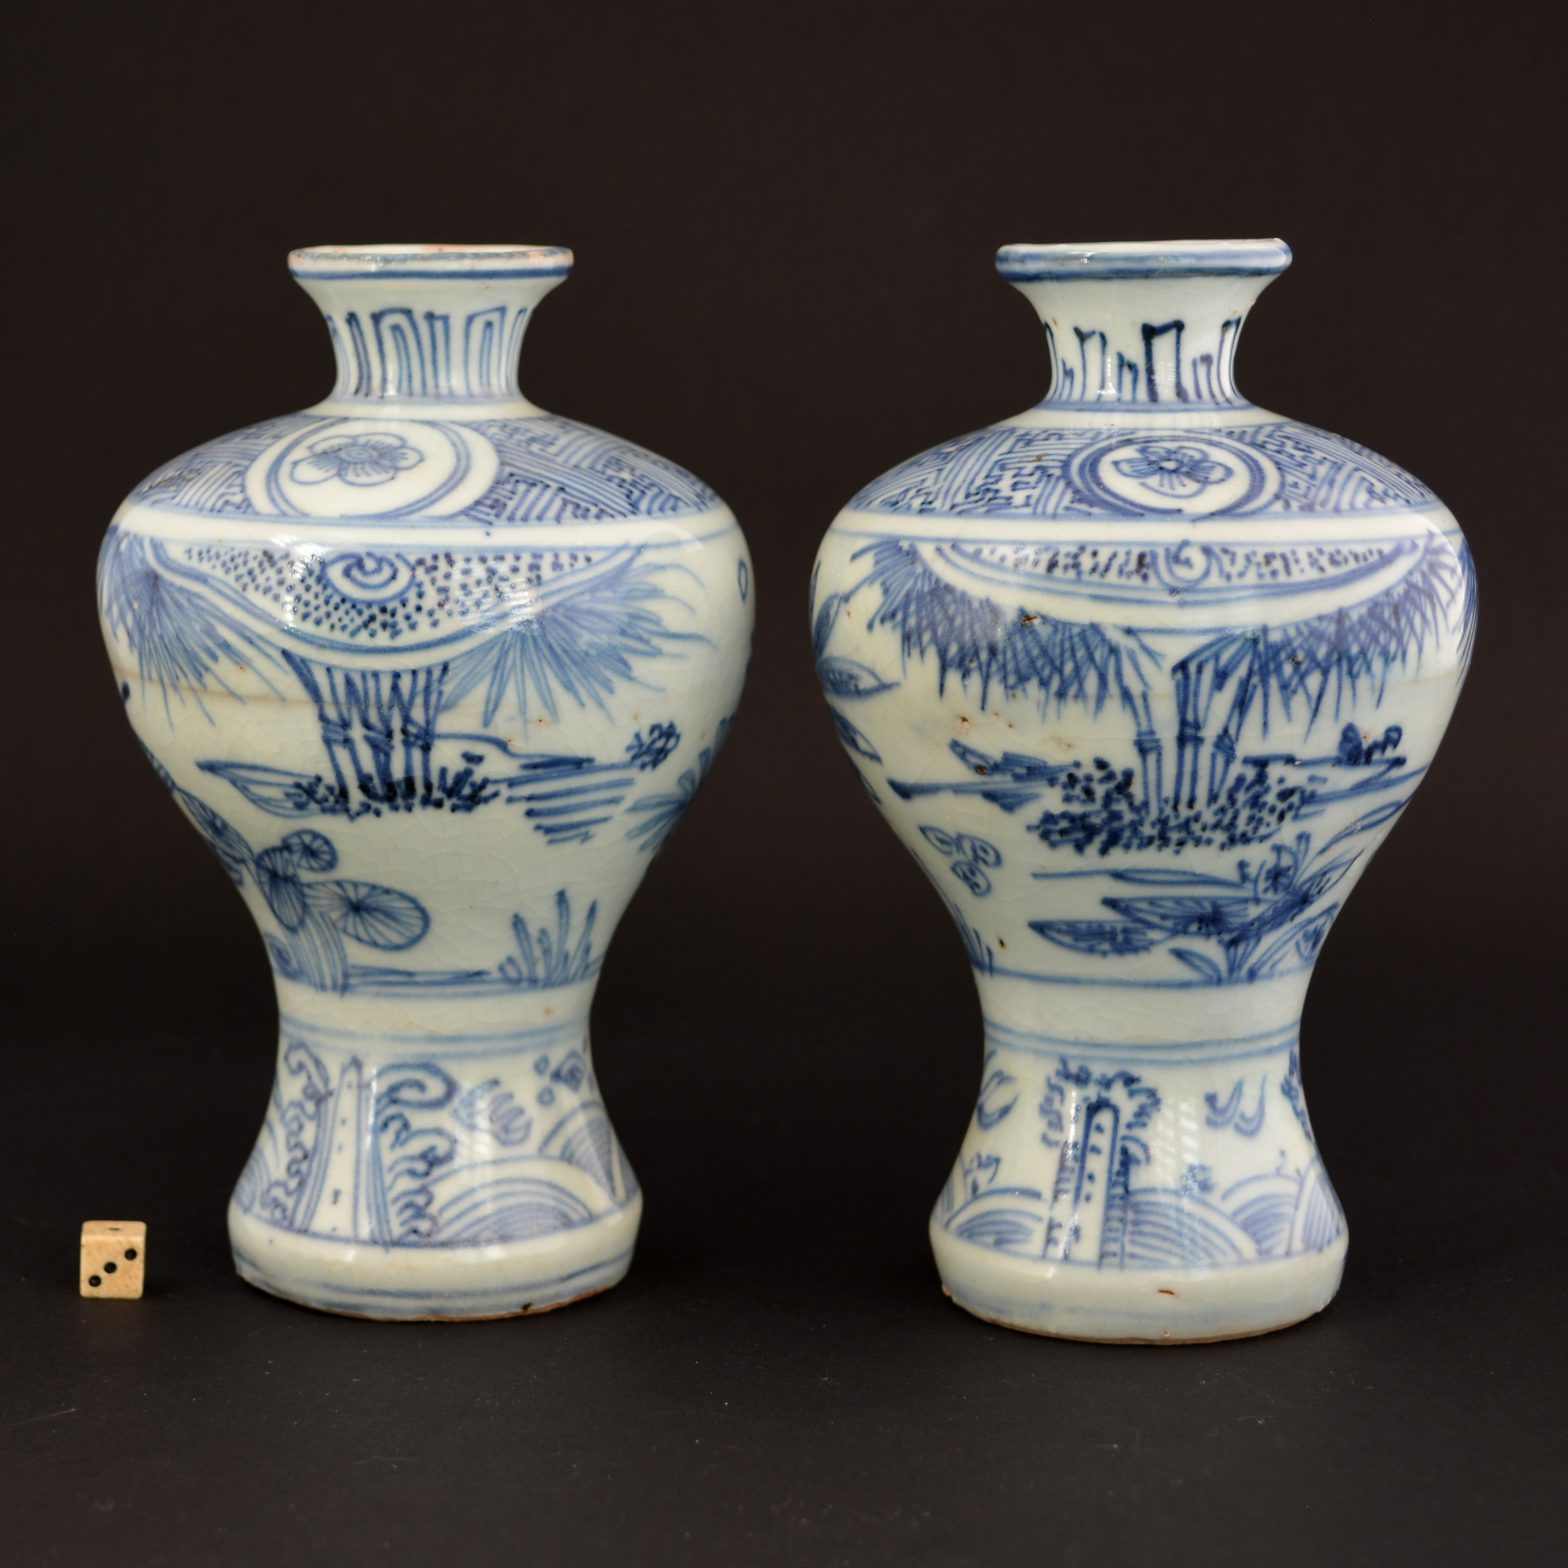 From the collection of Reginald Howard Reed Palmer MC, DL (1898-1970). He was one of the foremost collectors of his day. He started collecting in 1924 and exhibited widely. He began selling his collection in 1962 and, following several sales after death, 19 early blue and white porcelain objects were sold in Hong Kong. They were then purchased by the parents of the last owner.